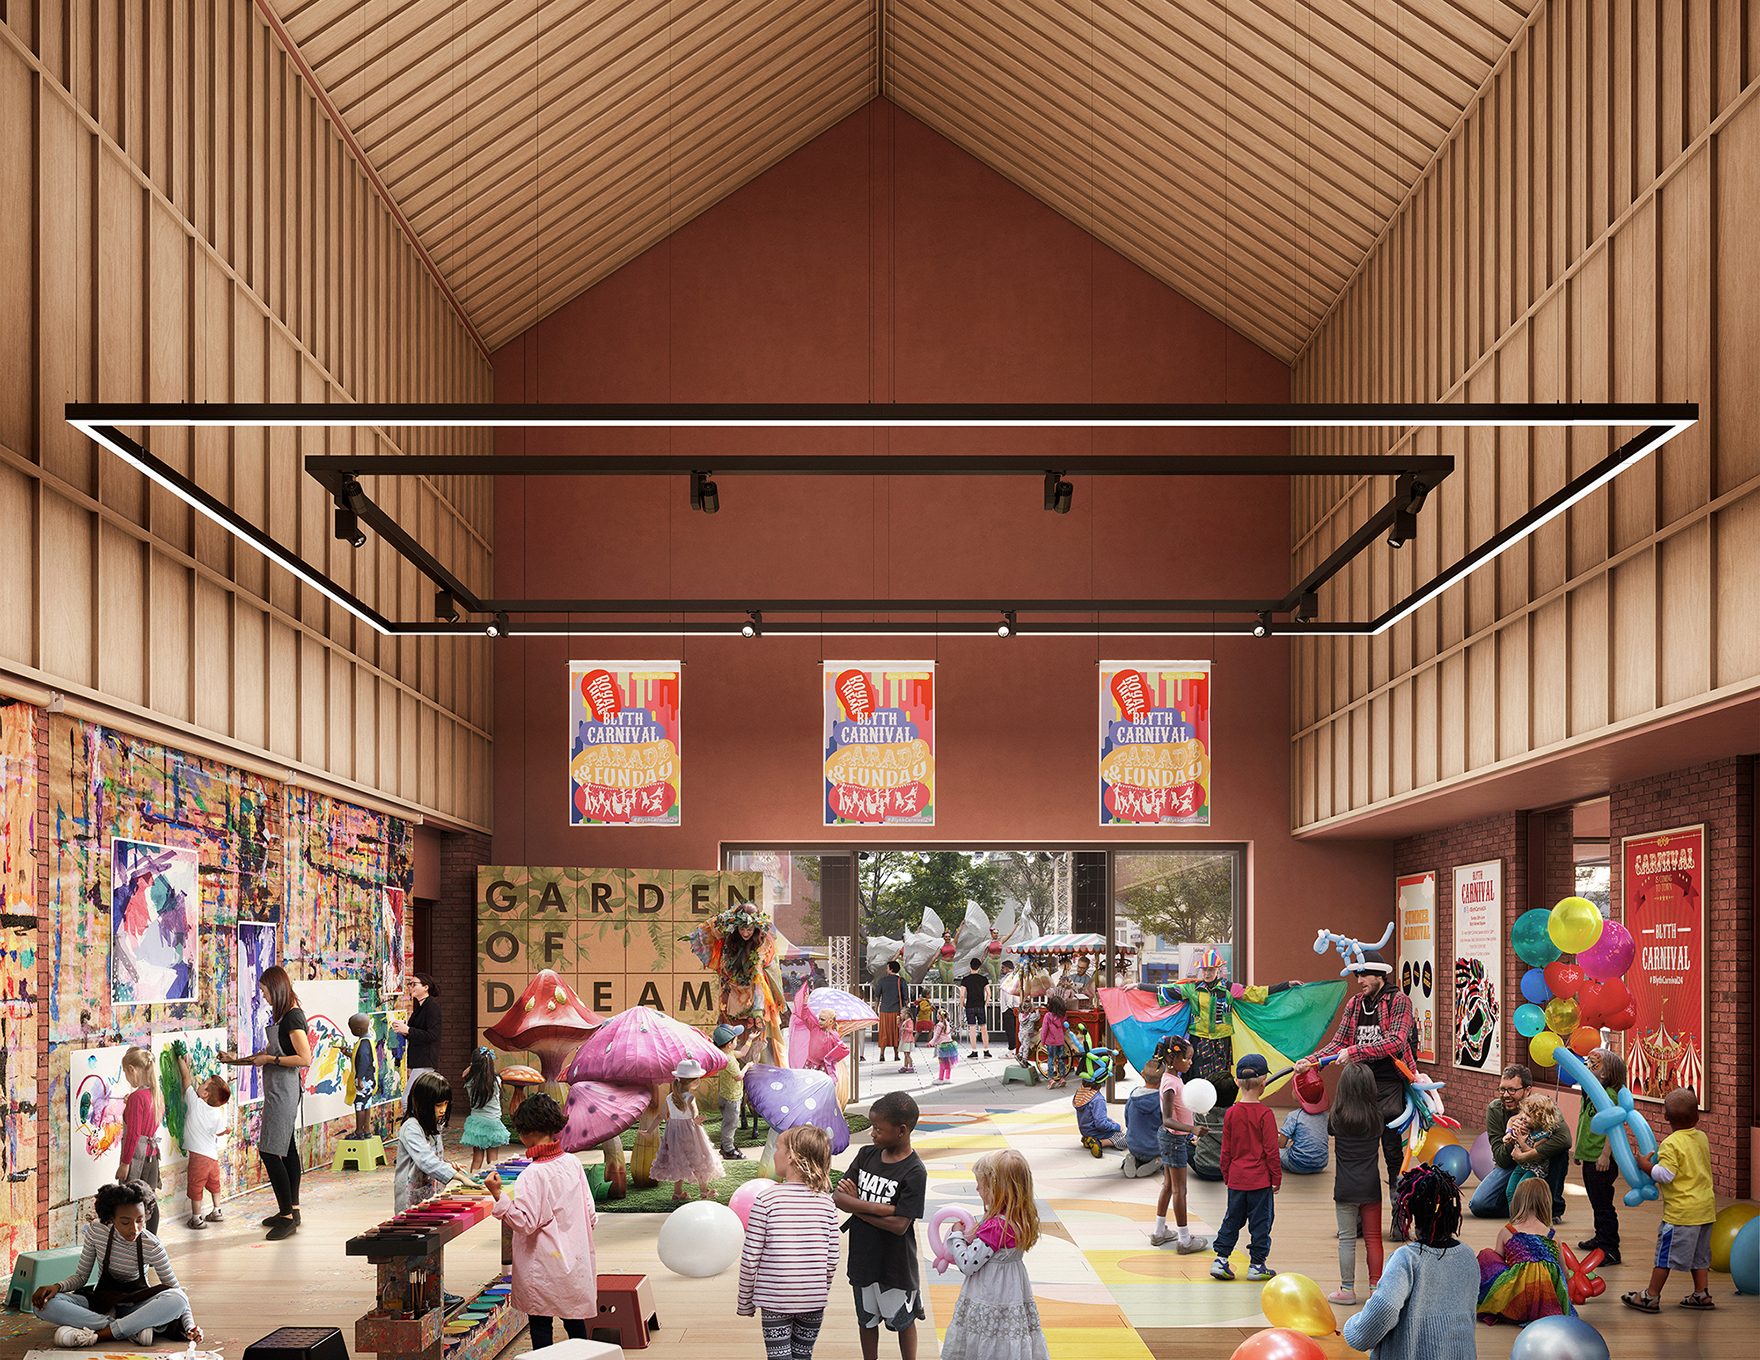 Blyth Cultural Venue Market Place Planning Approval Studio Faulknerbrowns Architects L